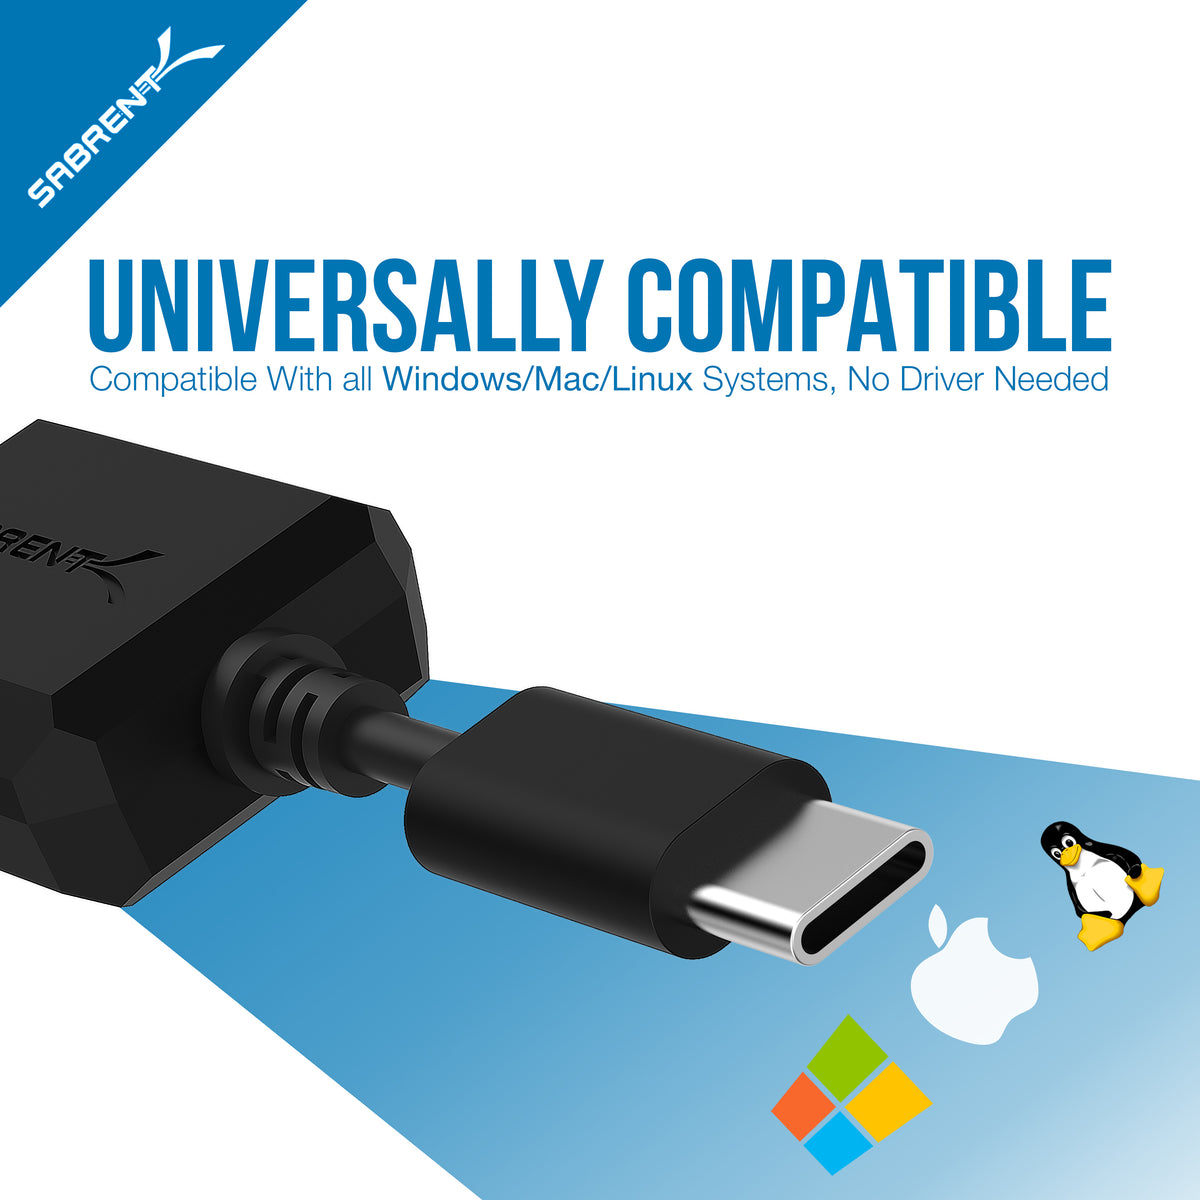 USB Type-C External Stereo Sound Adapter for Windows and Mac